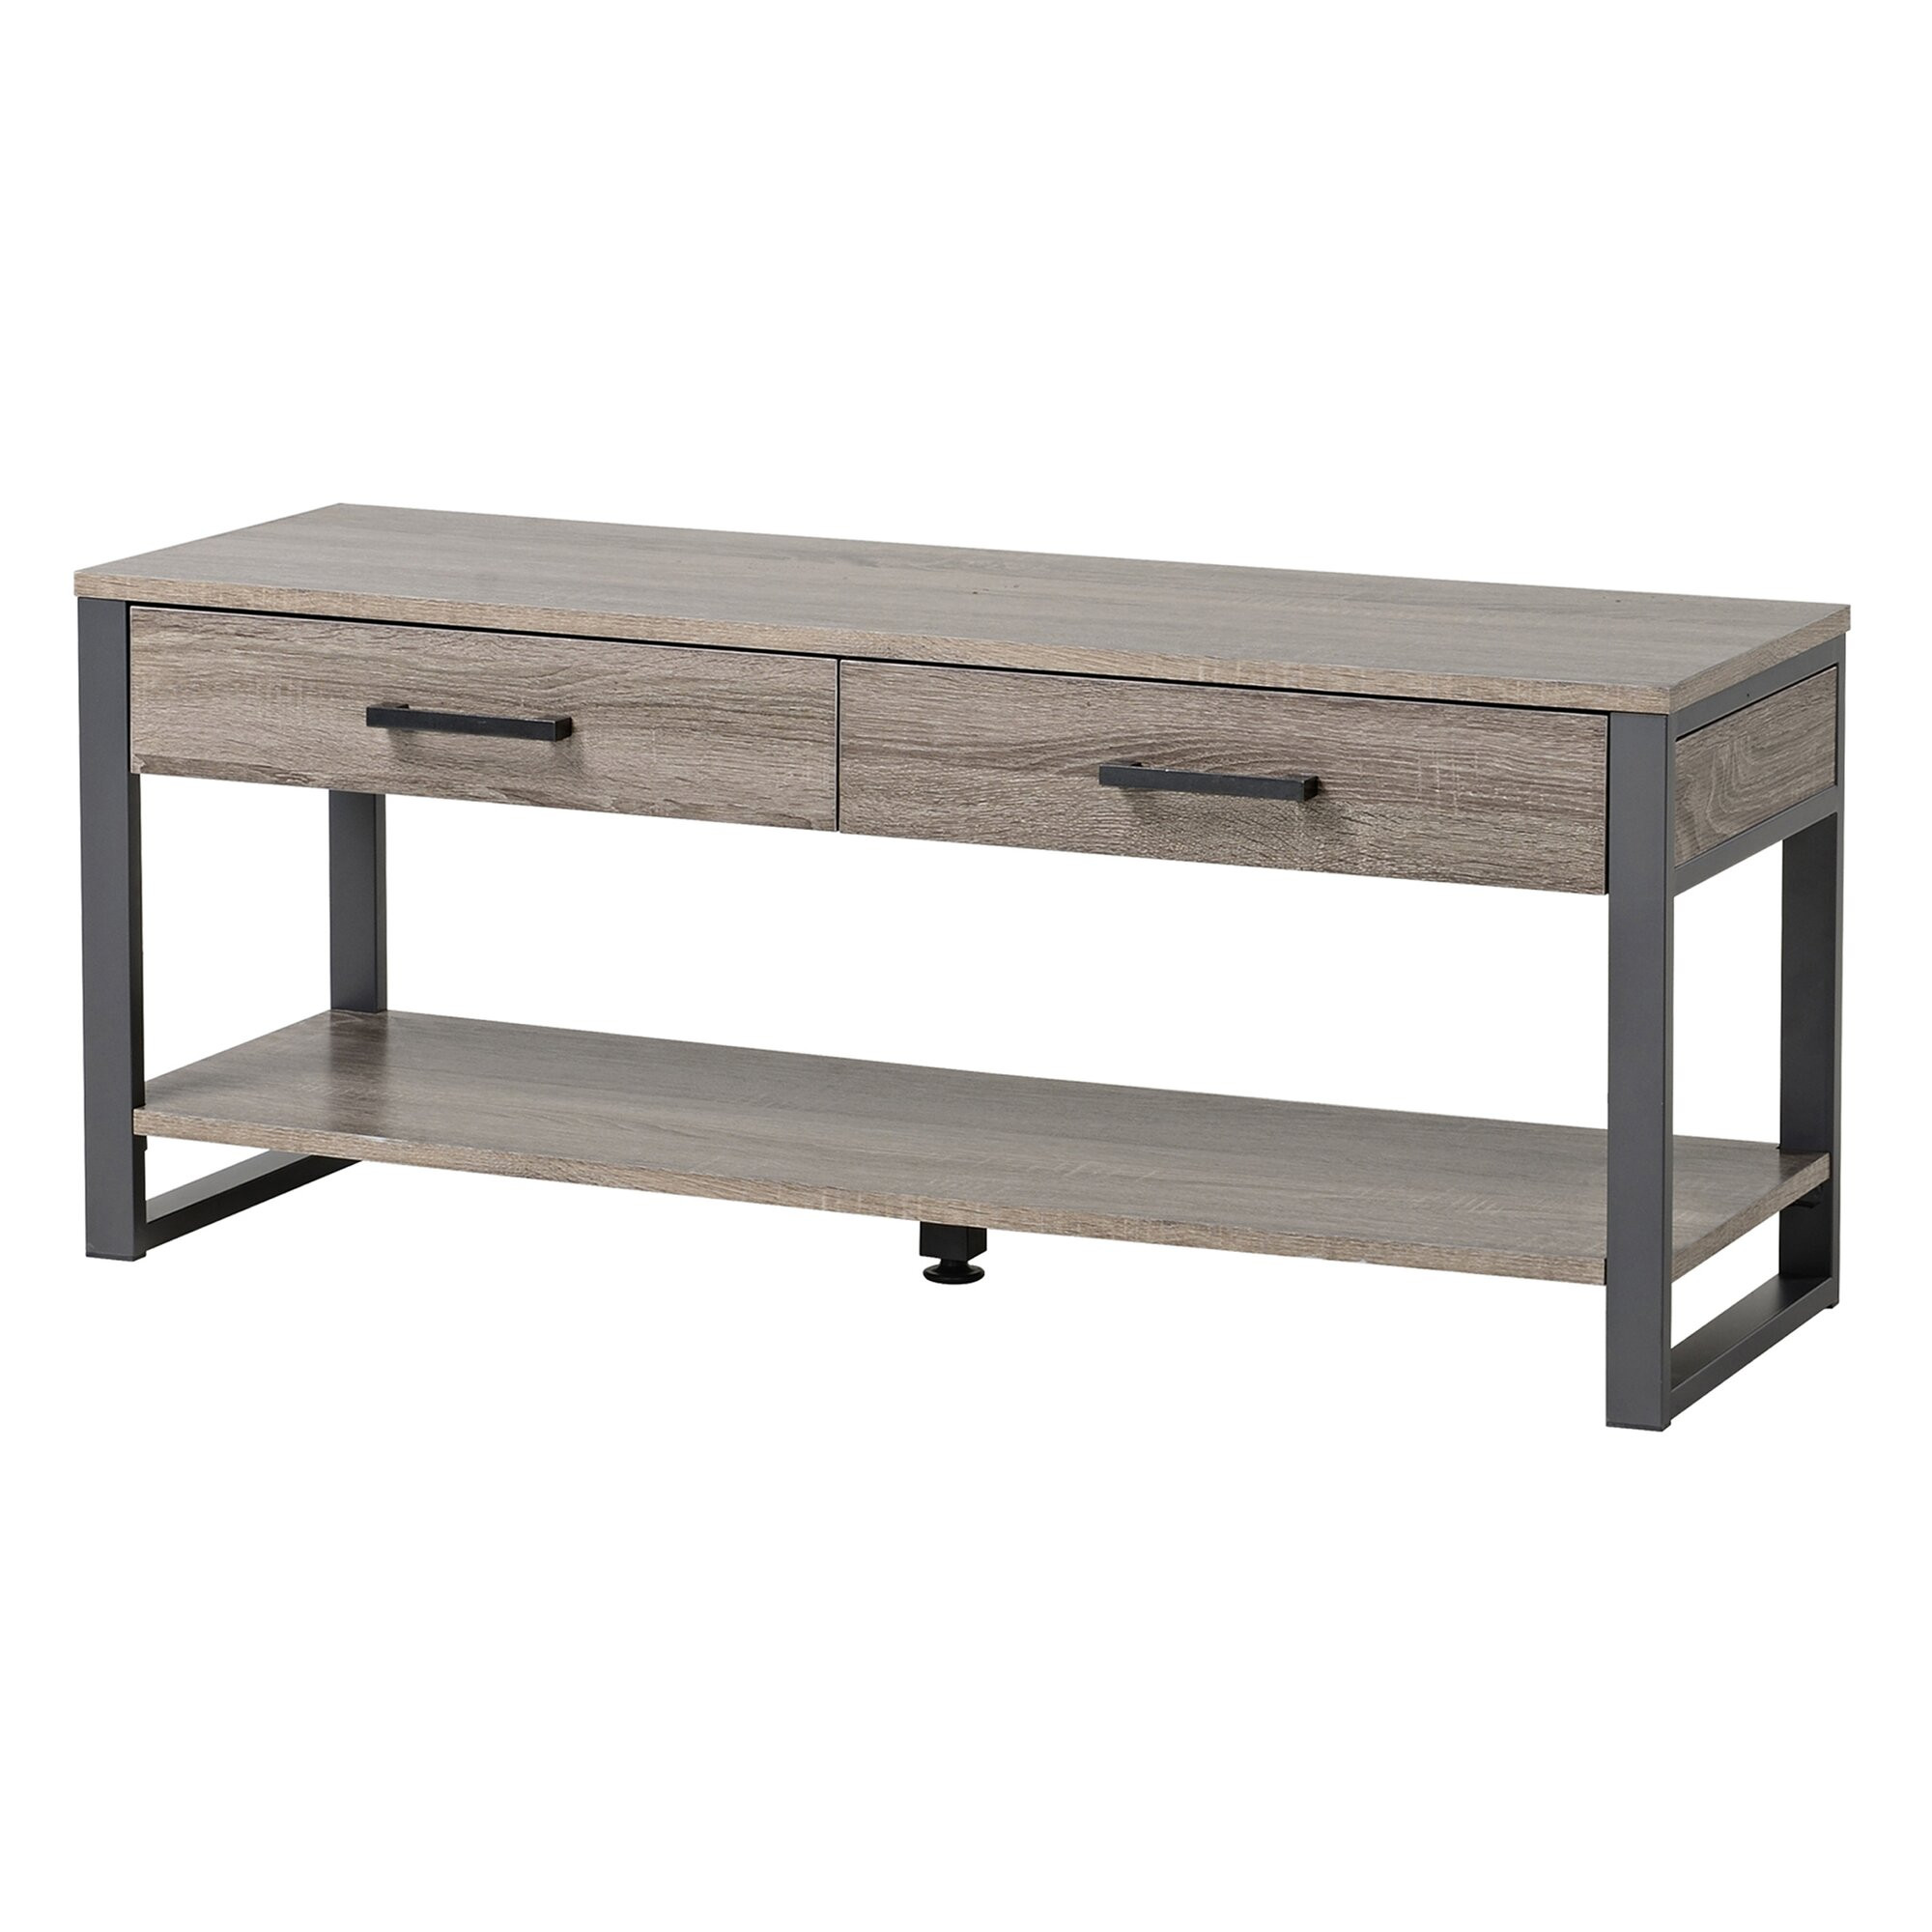 Entry Storage Bench
 Wood Storage Entryway Bench & Reviews